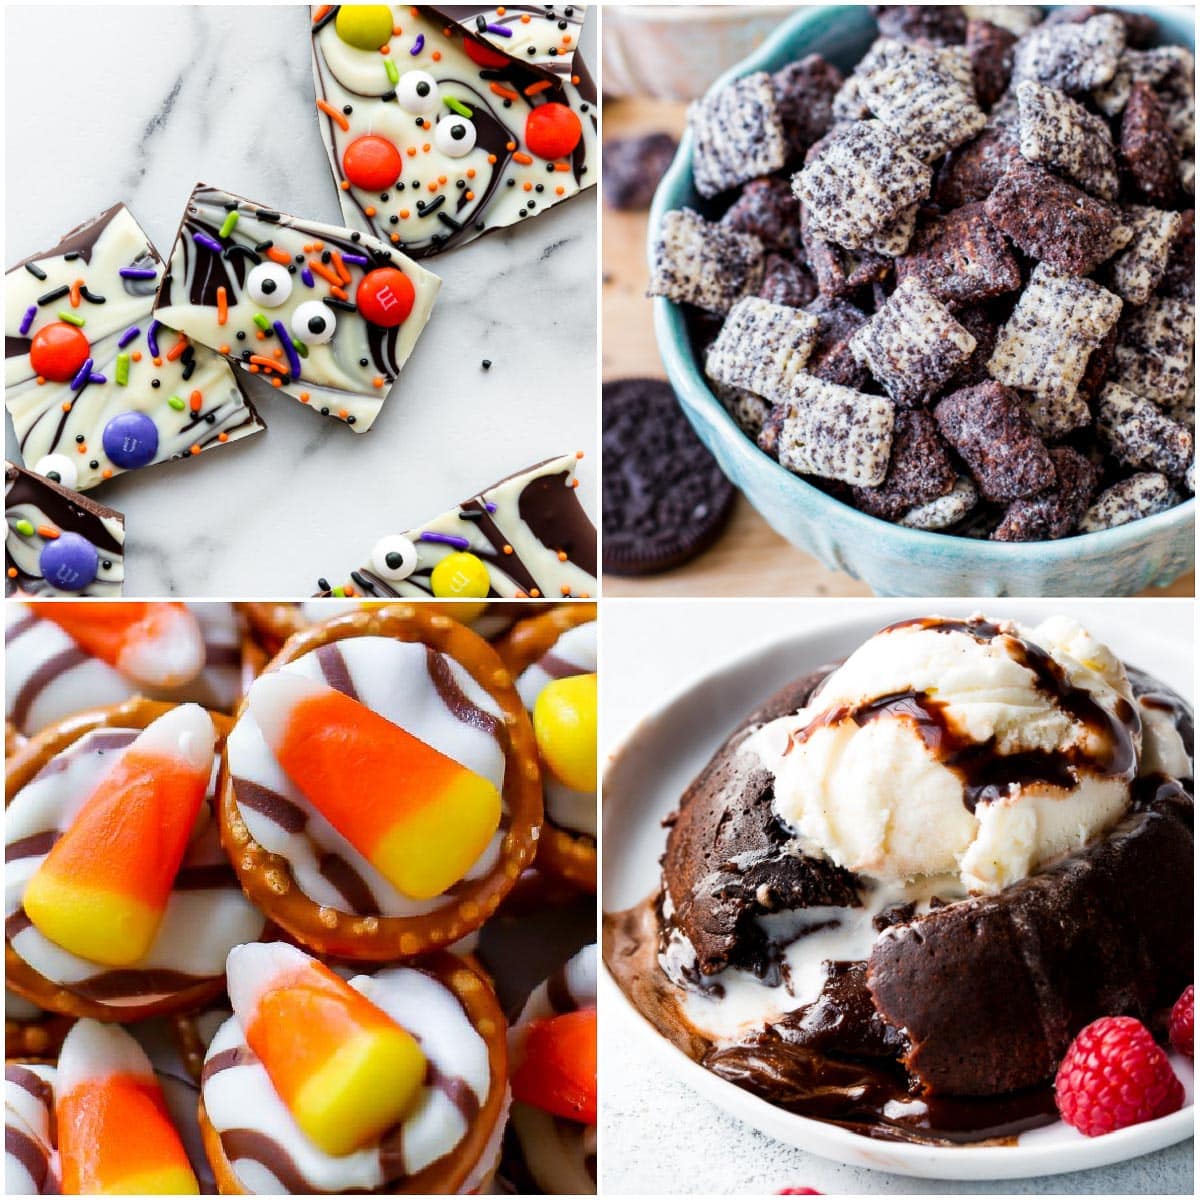 collage of easy sweet recipes including chocolate bark decorated for Halloween, Oreo muddy buddies snack mix, and lava cake